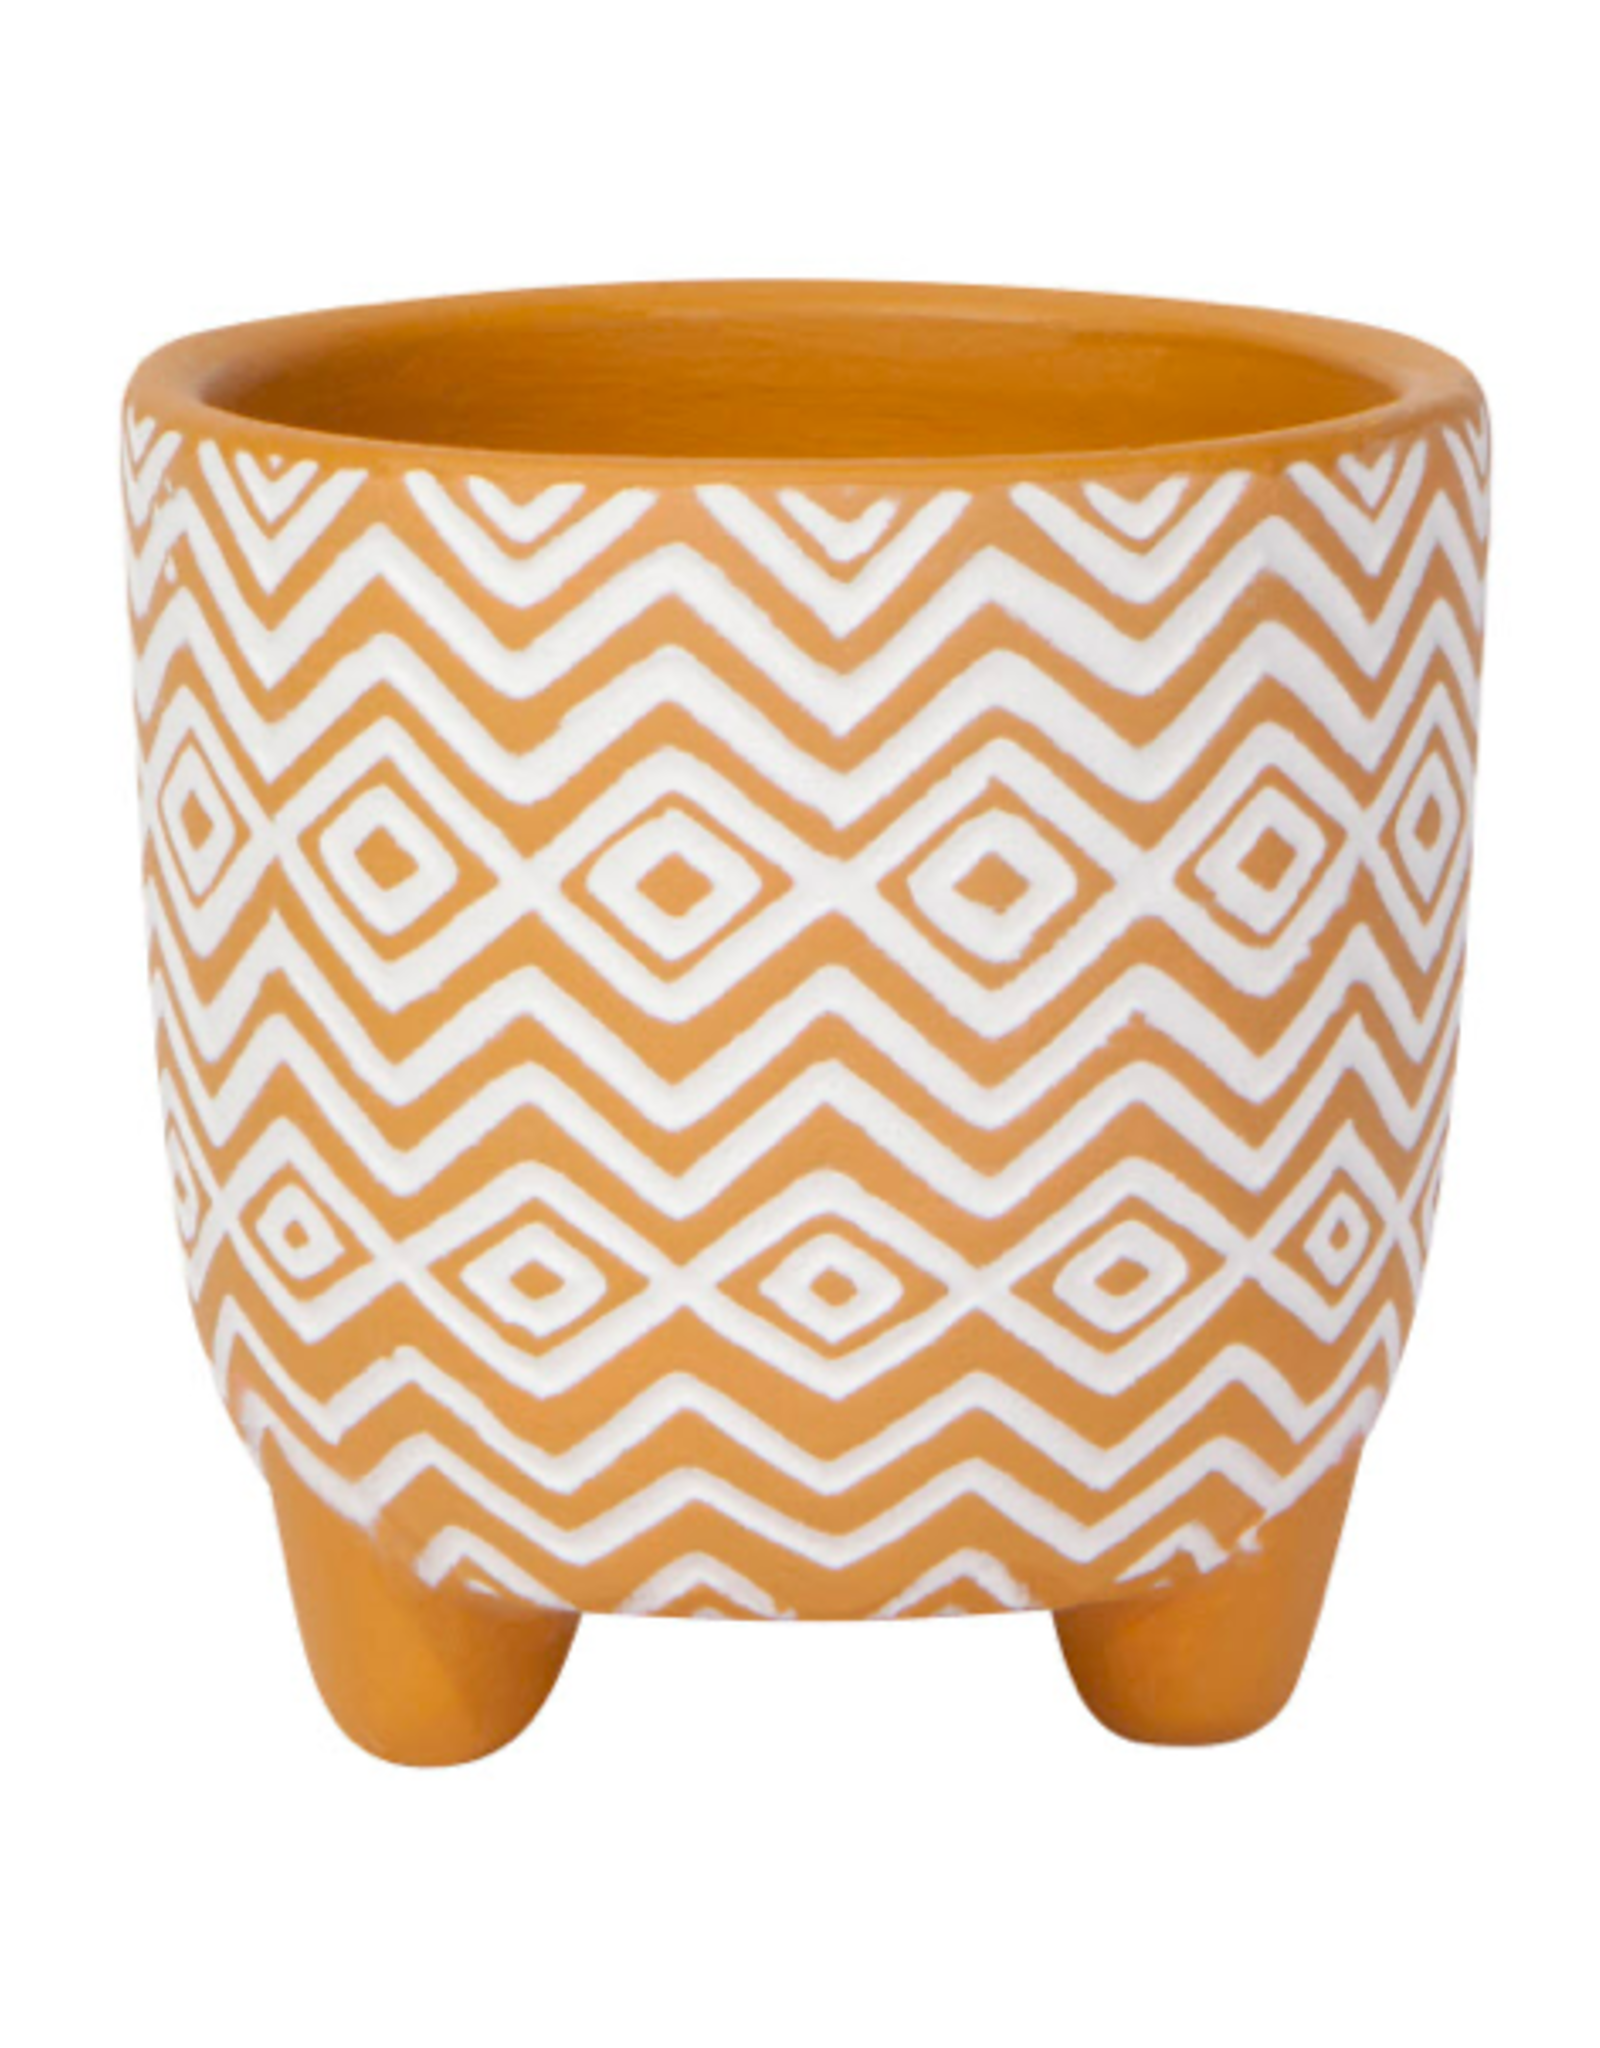 DCA - Planter, Footed  / Yellow ZigZag, 3"